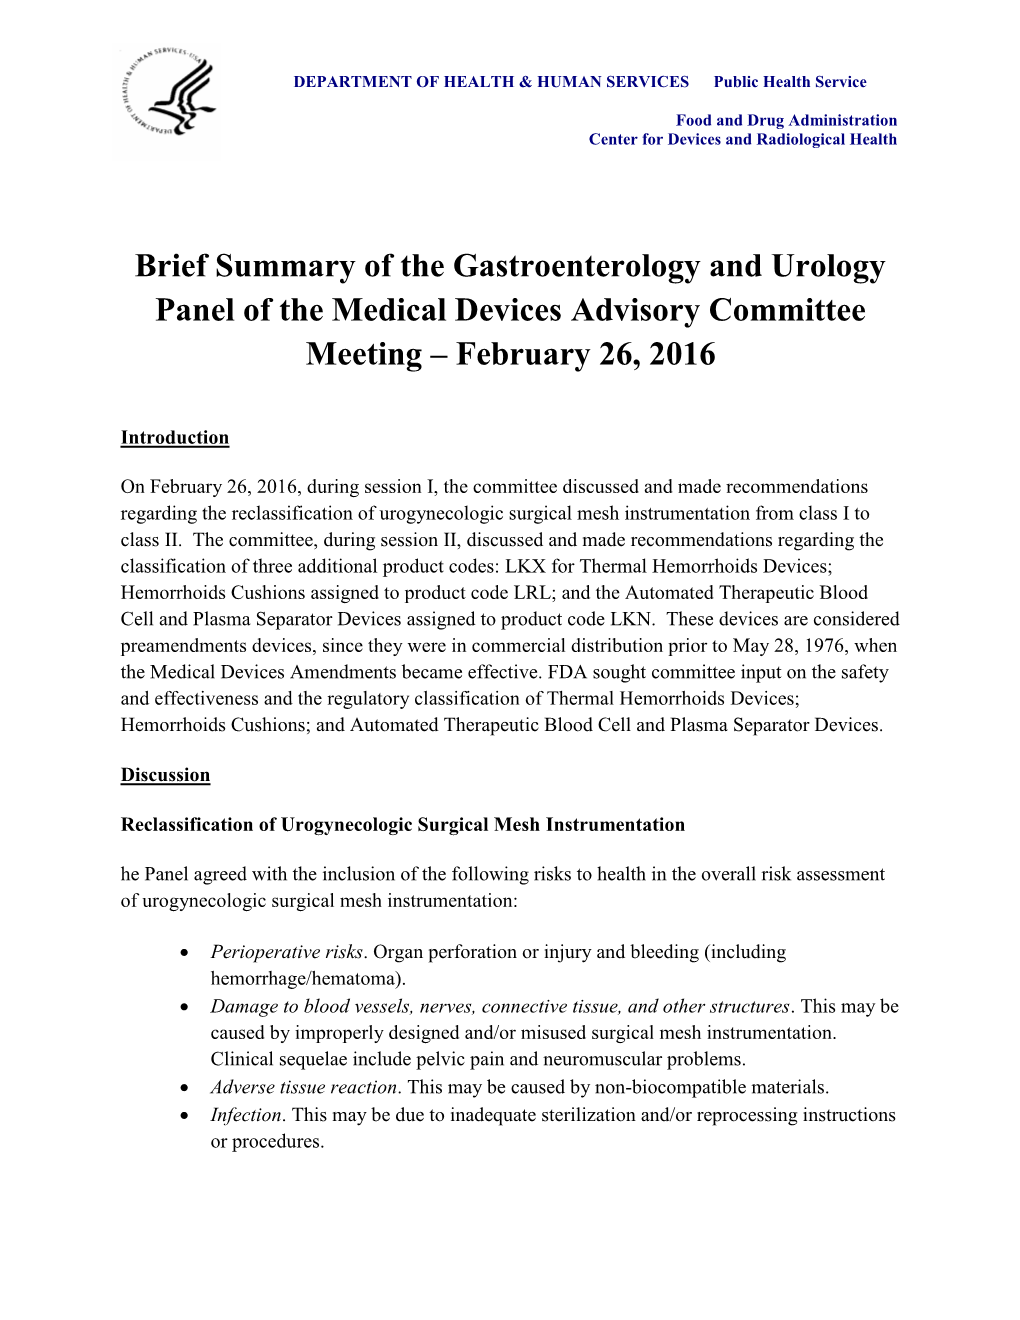 Brief Summary of the Gastroenterology and Urology Panel of the Medical Devices Advisory Committee Meeting – February 26, 2016